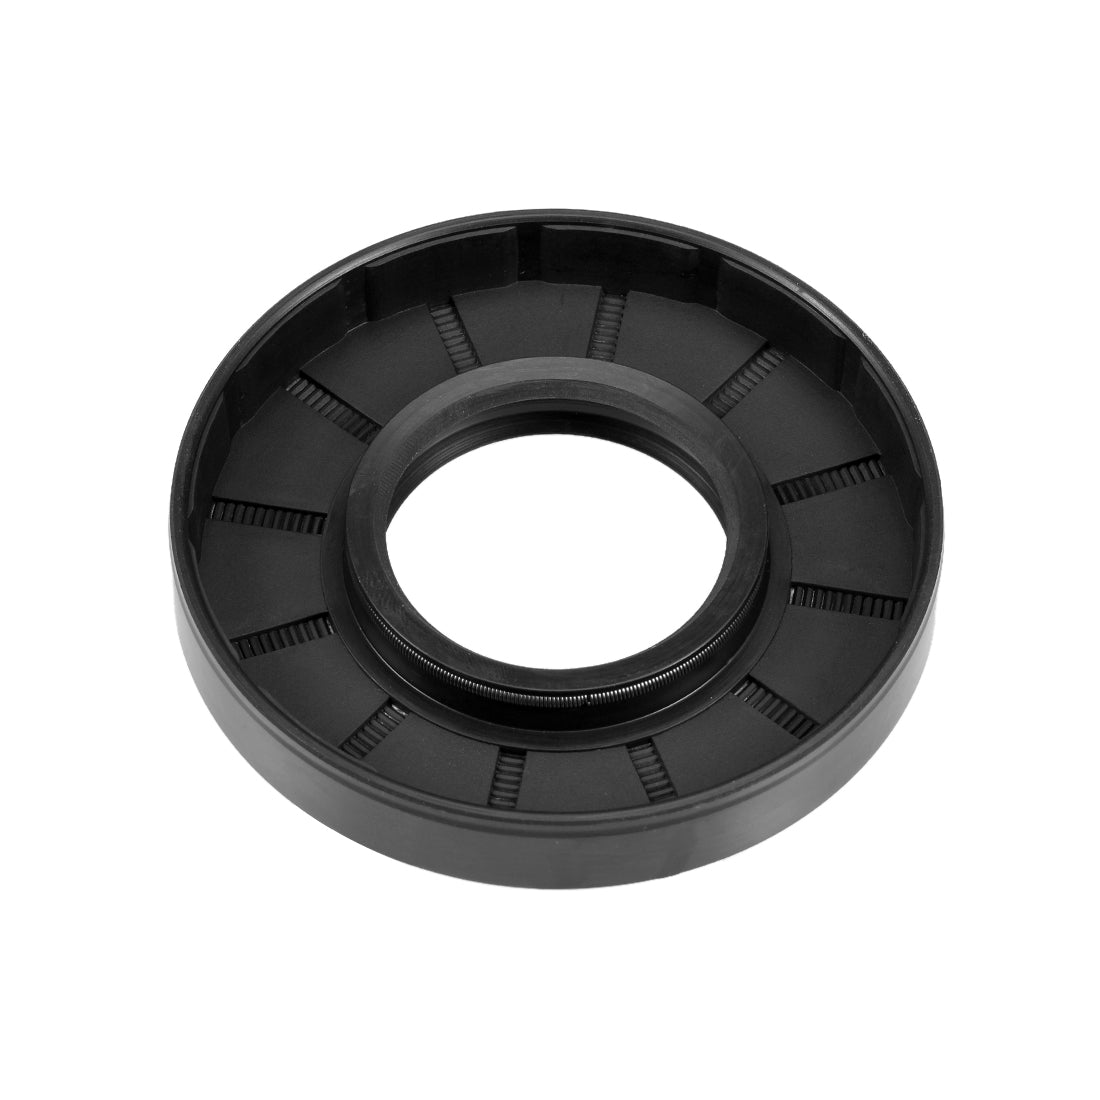 Uxcell Uxcell Oil Seal, TC 35mm x 60mm x 12mm, Nitrile Rubber Cover Double Lip